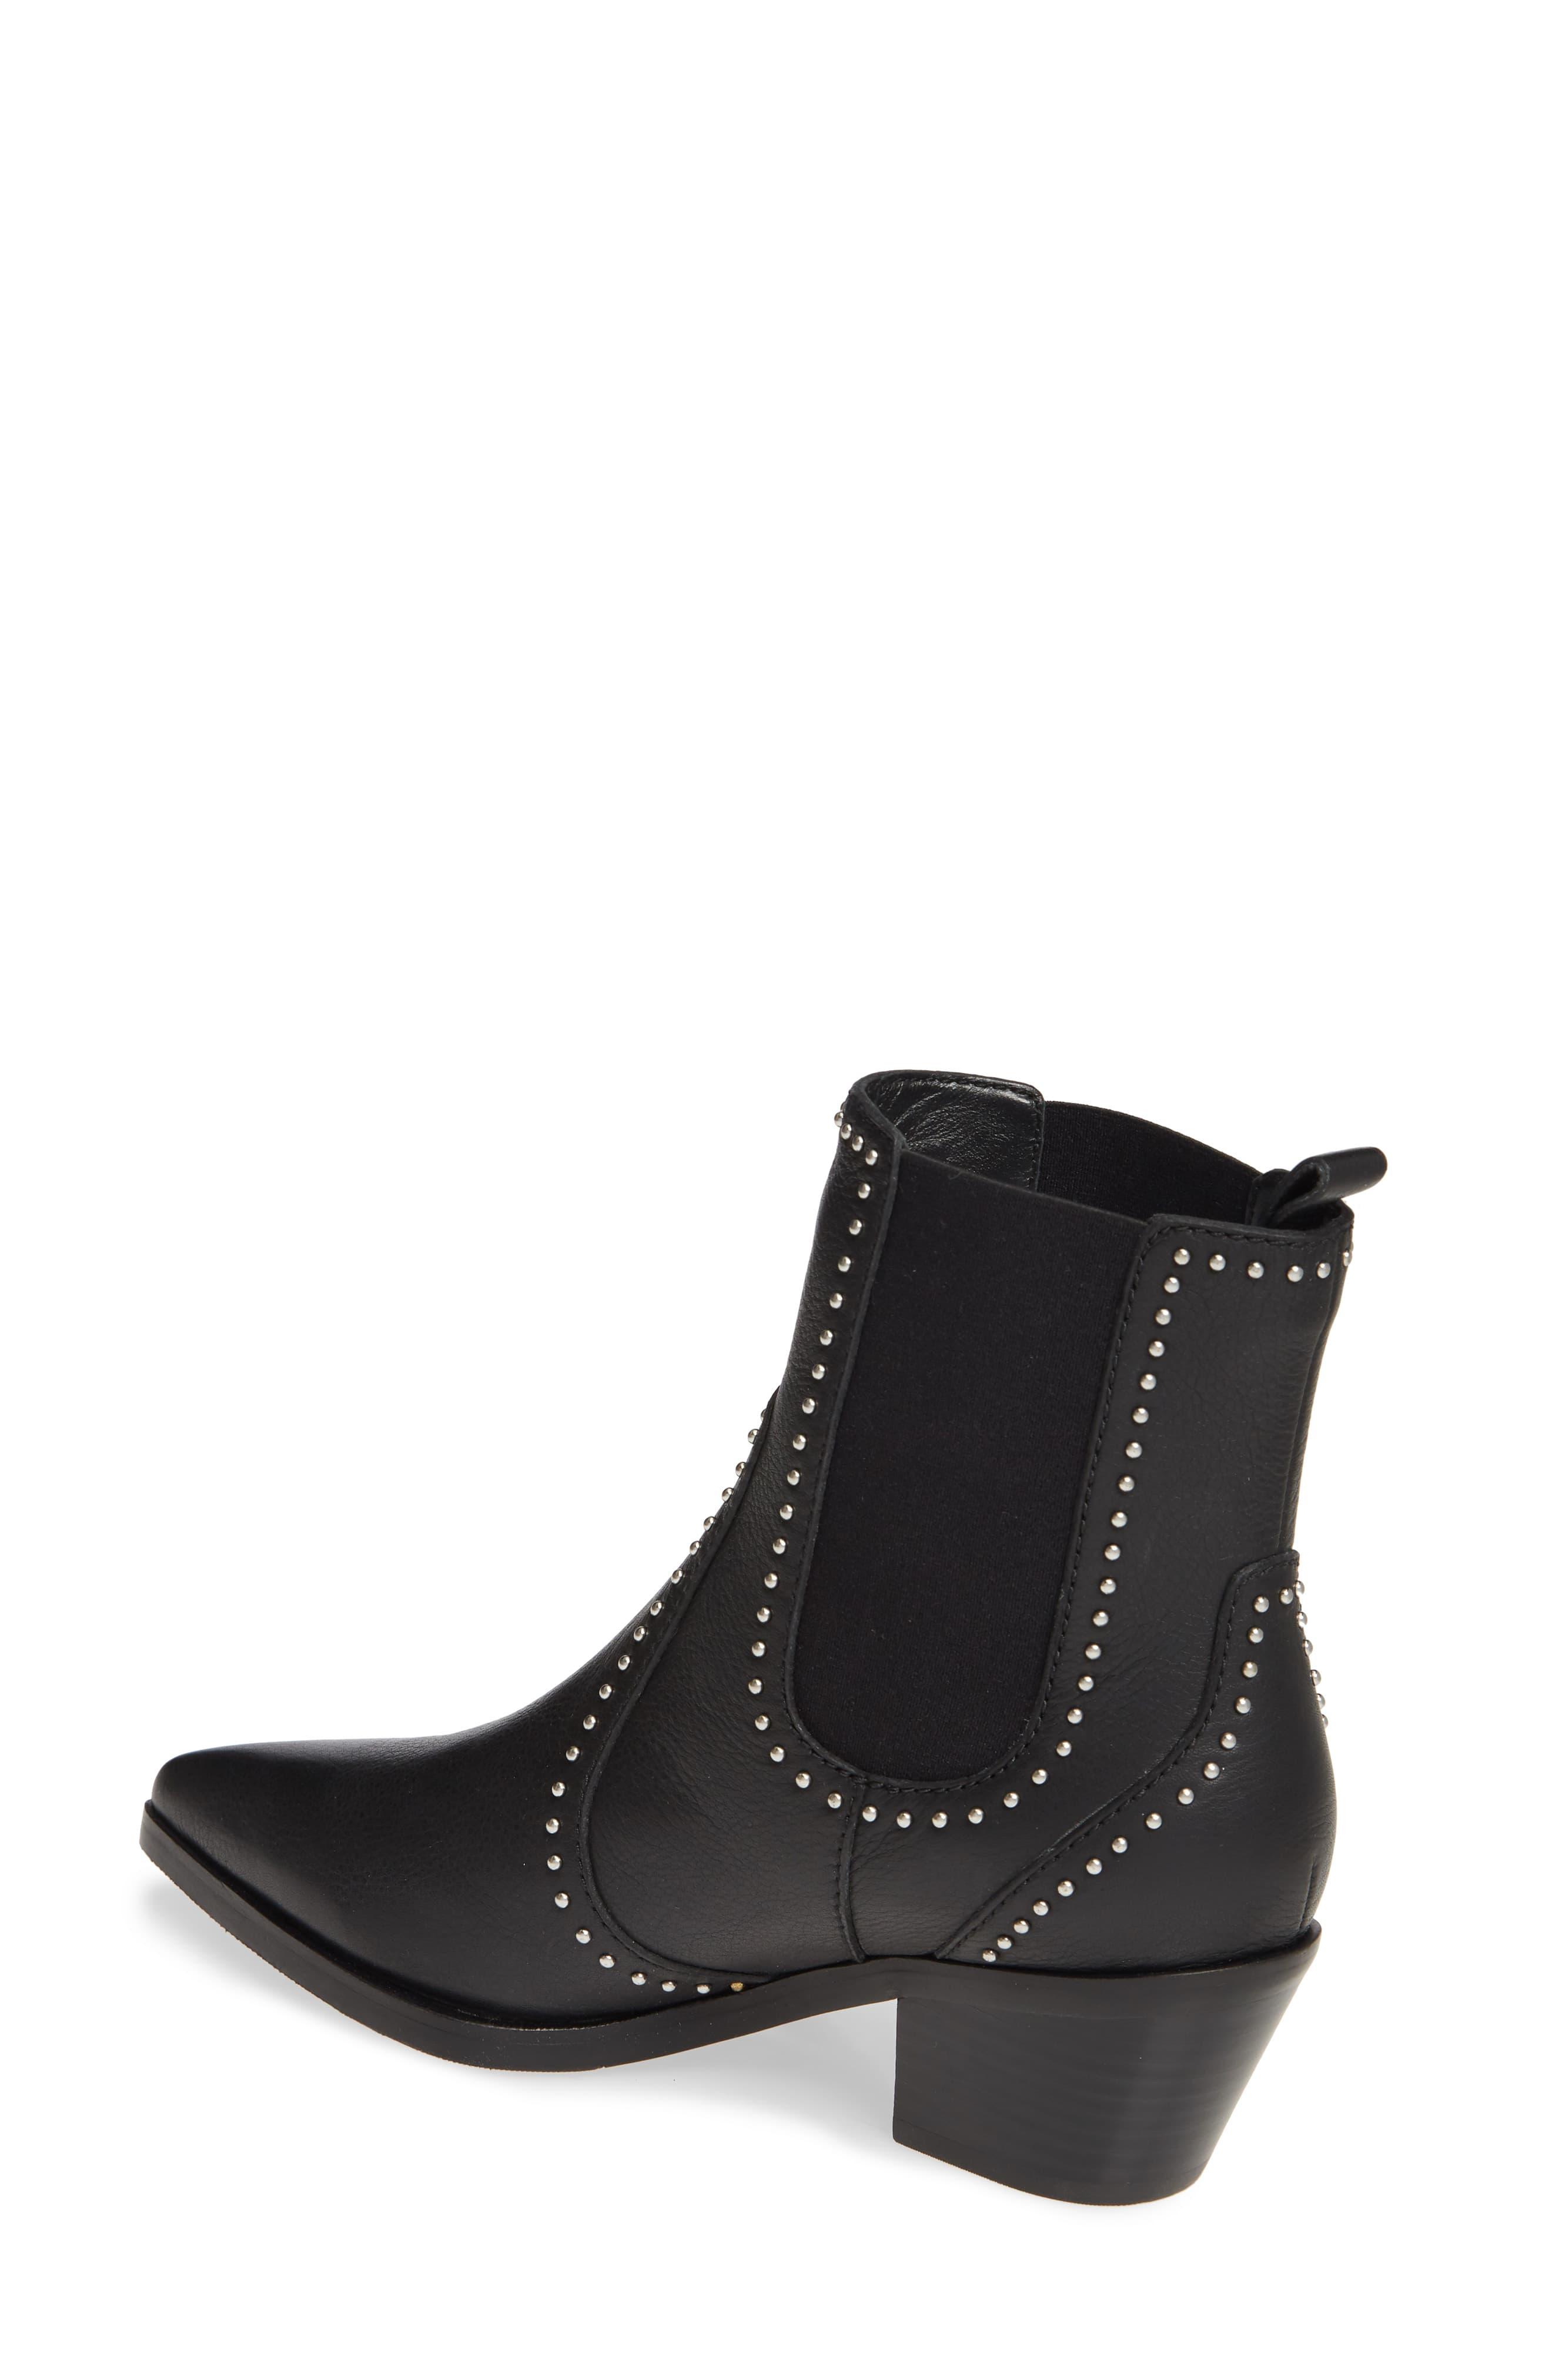 PAIGE Willa Studded Chelsea Boot in Black - Lyst